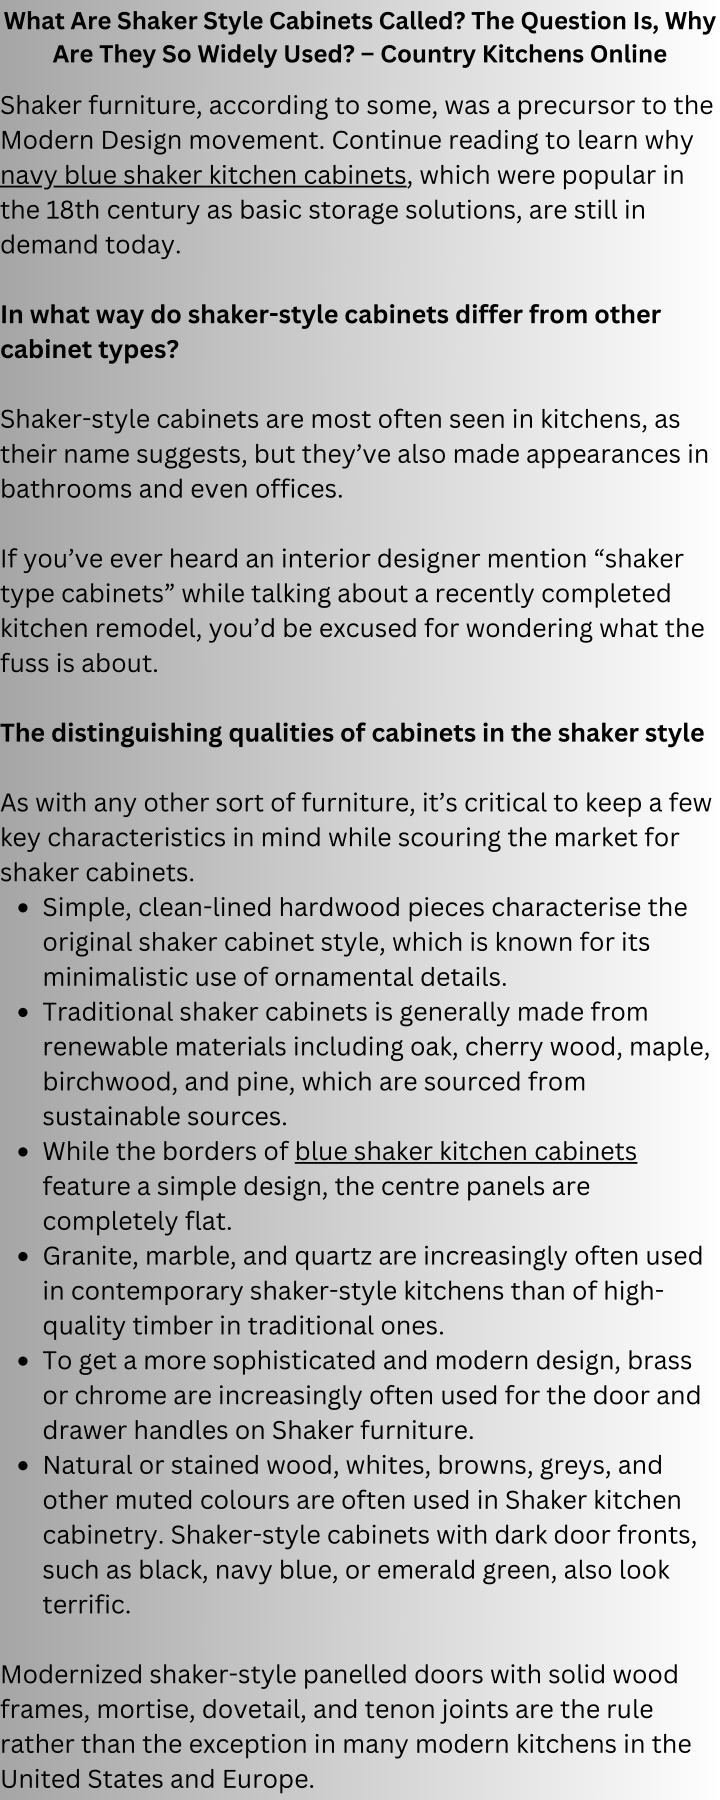 what are shaker style cabinets called